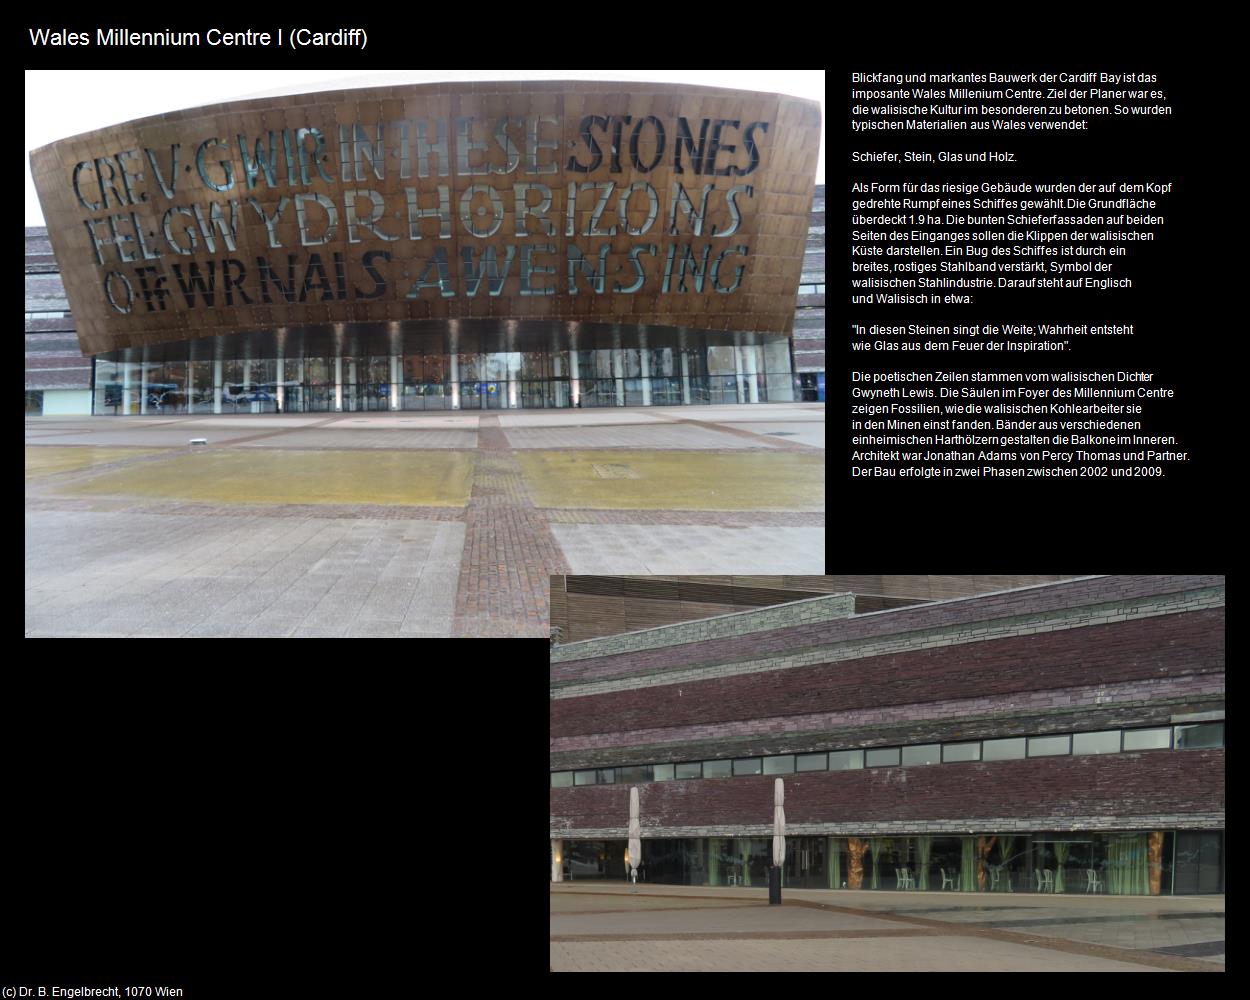 Wales Millennium Centre I  (Cardiff, Wales) in Kulturatlas-ENGLAND und WALES